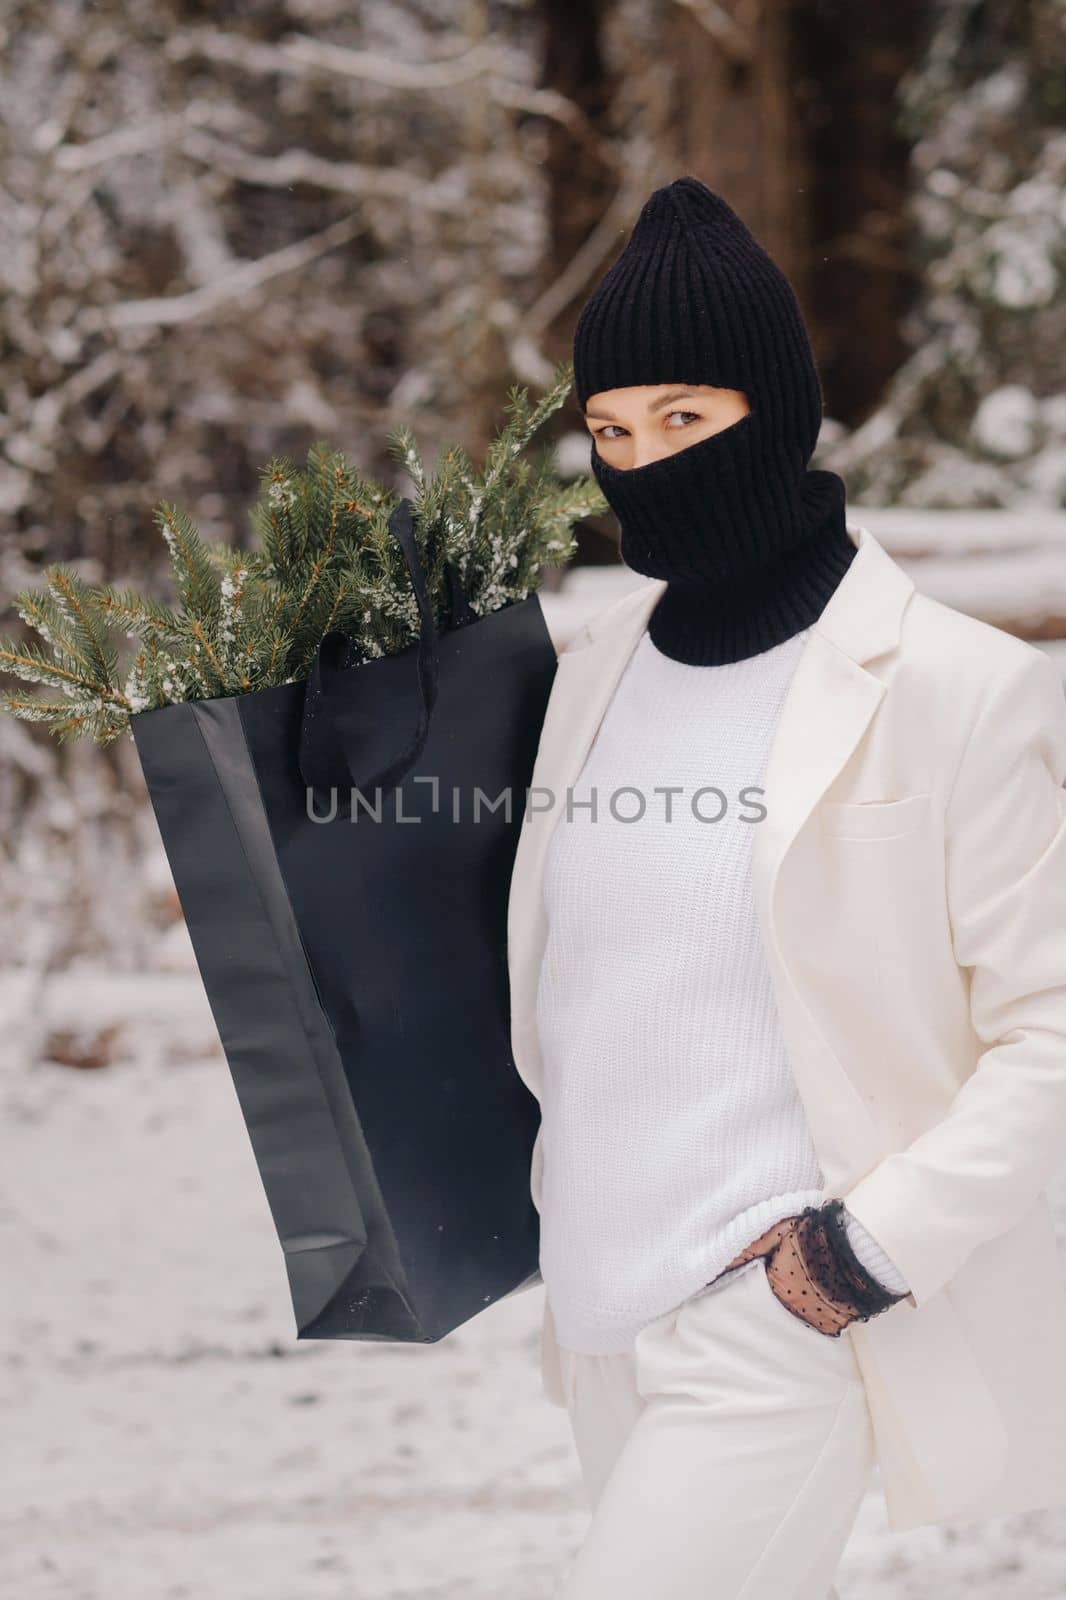 A girl in a white suit and balaclava with a package of Christmas trees in the winter forest on New Year's Eve.New Year's concept by Lobachad